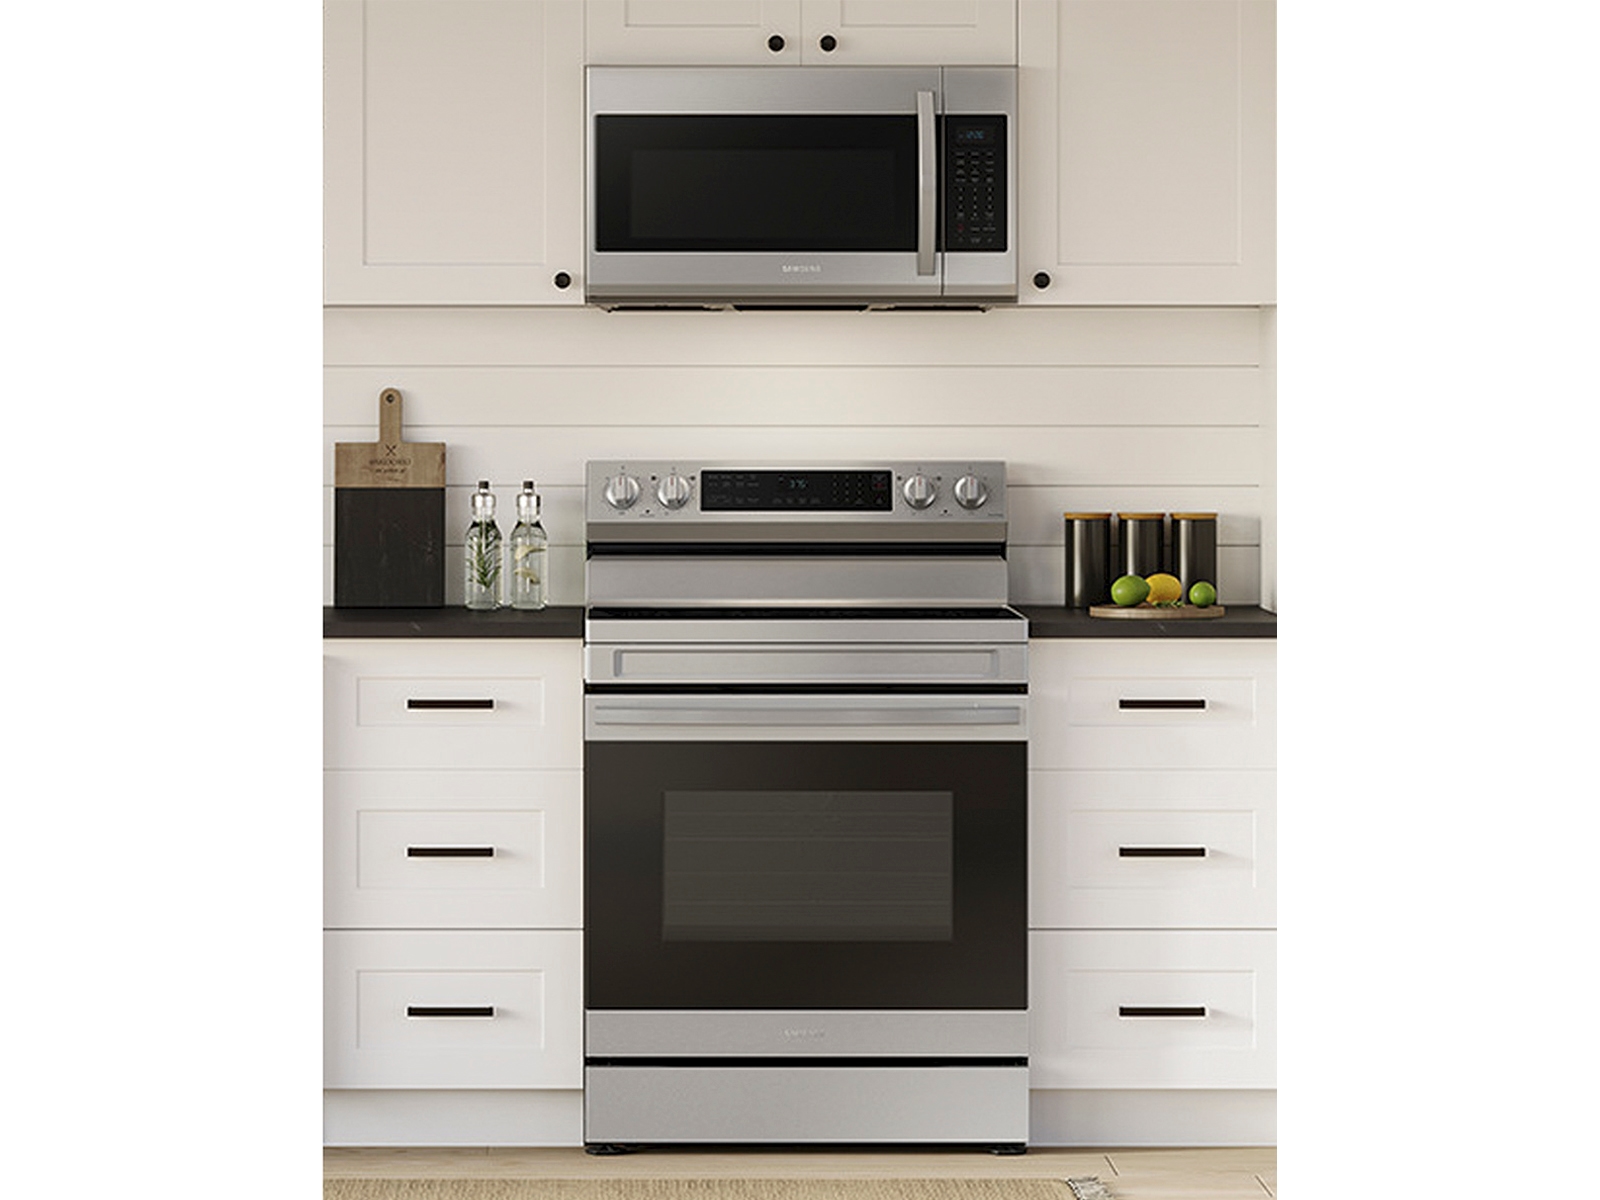 NE63A6511SS by Samsung - 6.3 cu. ft. Smart Freestanding Electric Range with  No-Preheat Air Fry & Convection in Stainless Steel